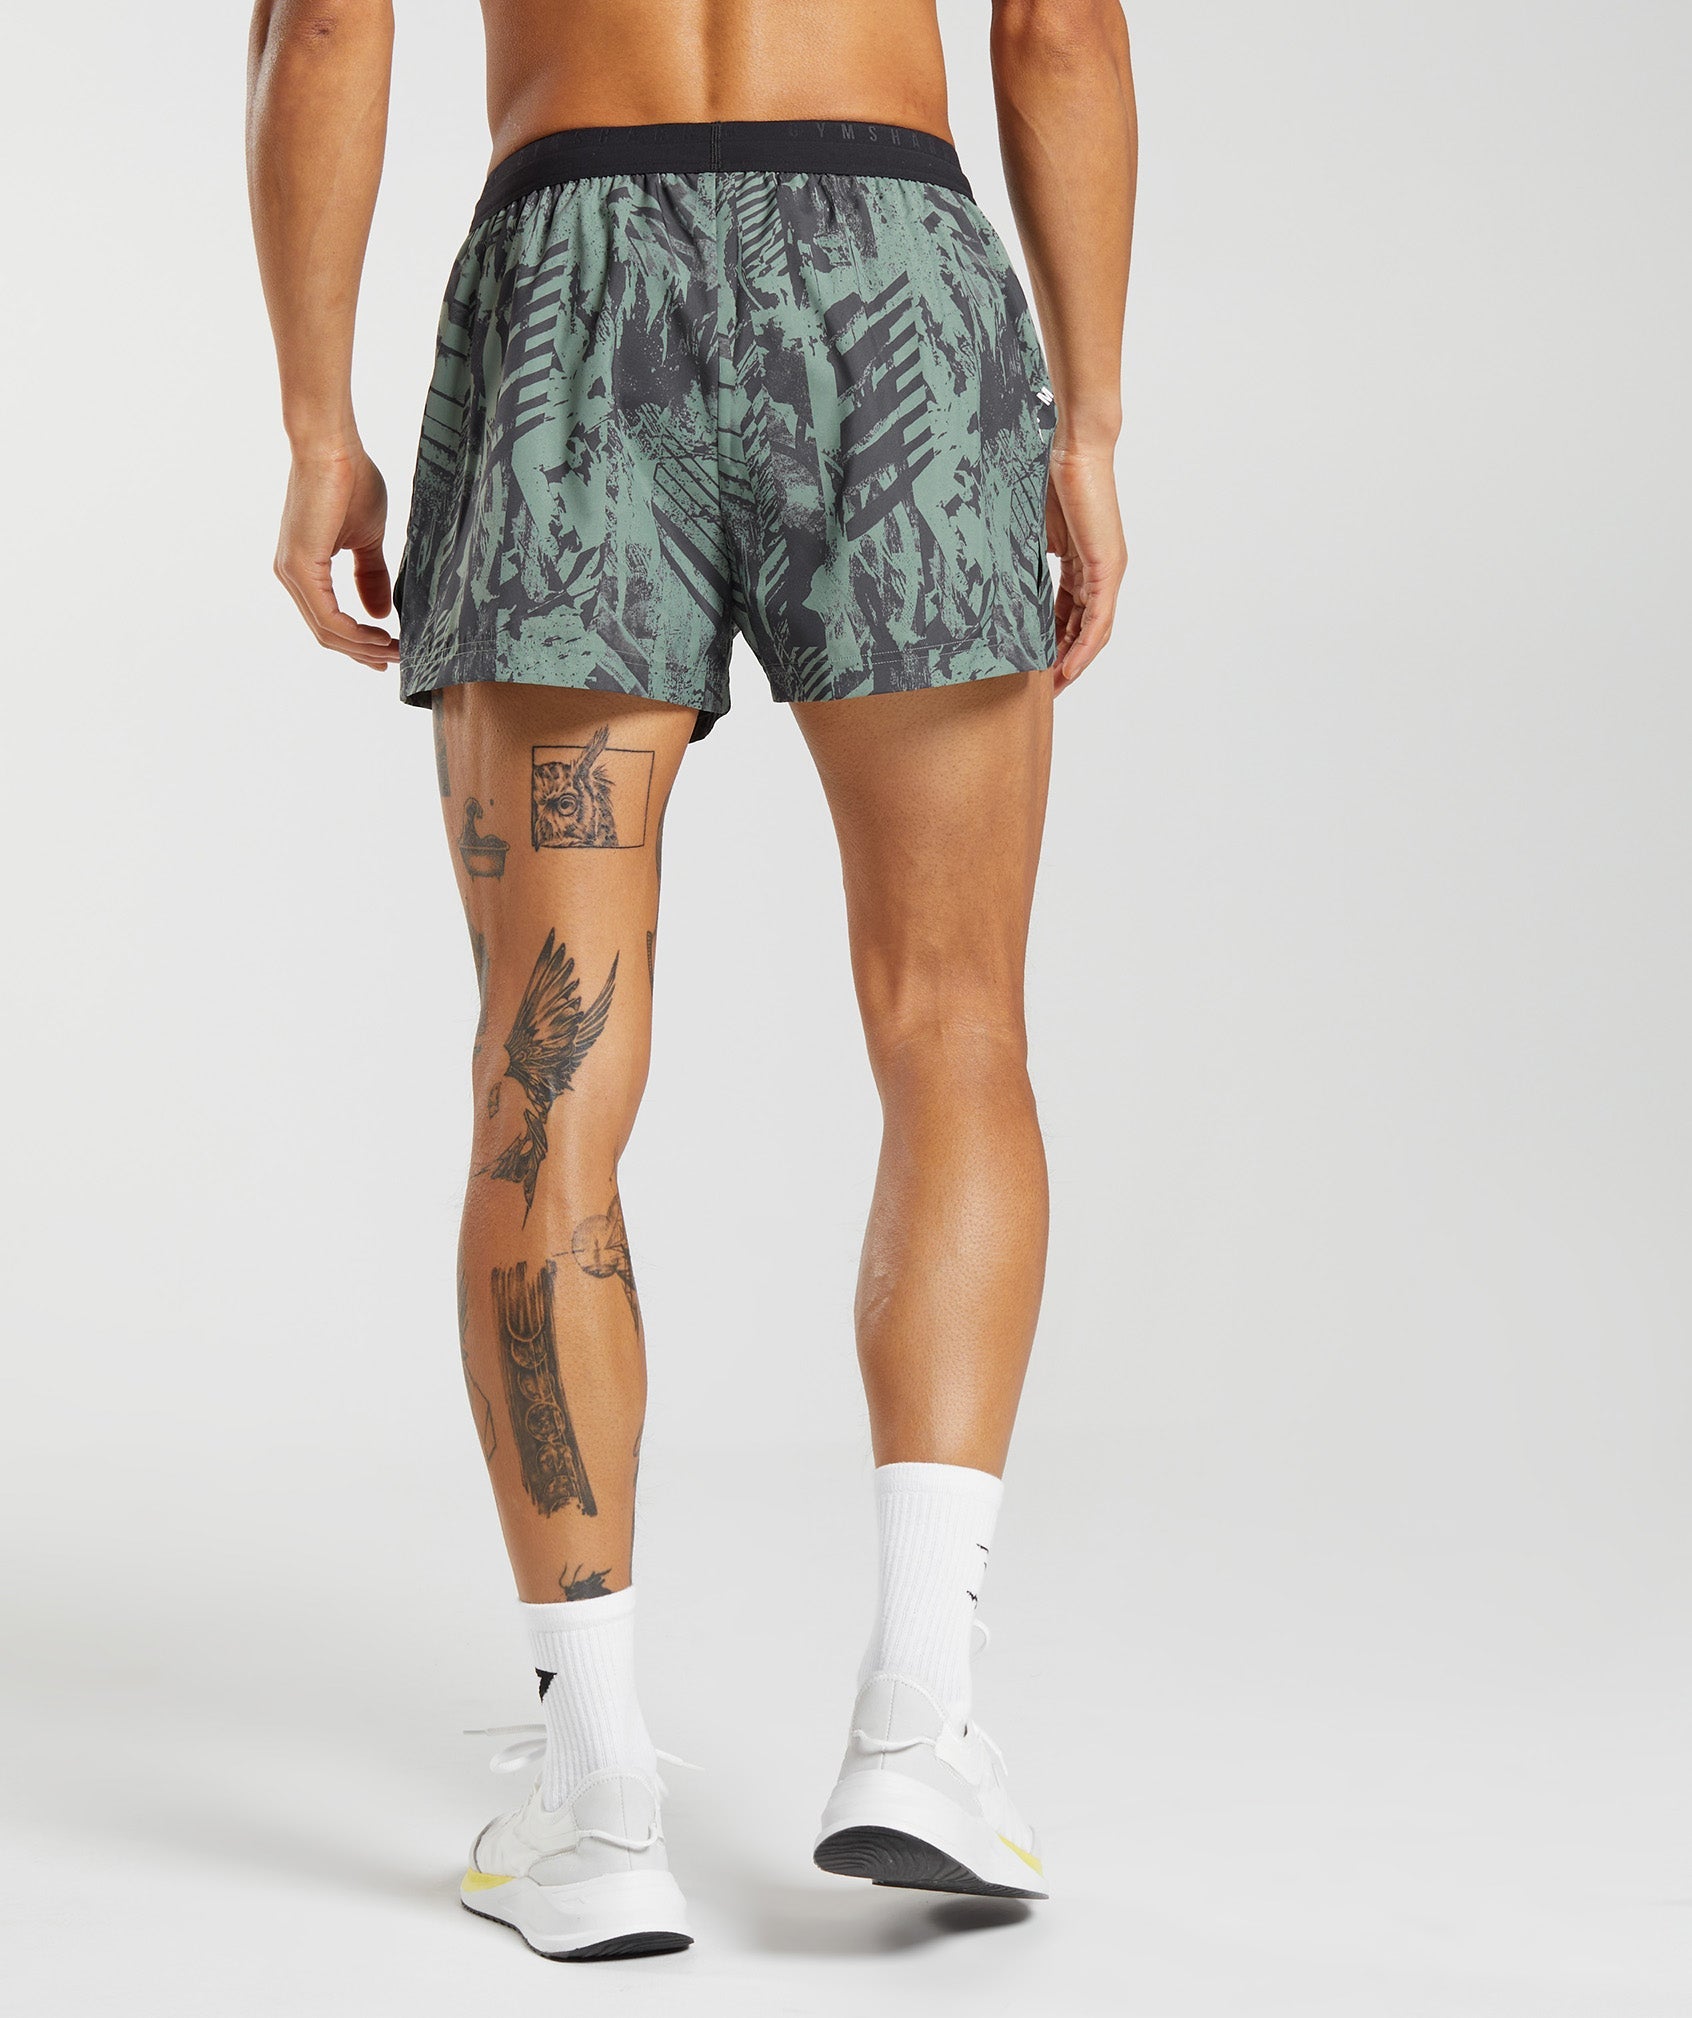 Sport Run 3" Shorts in Willow Green - view 2